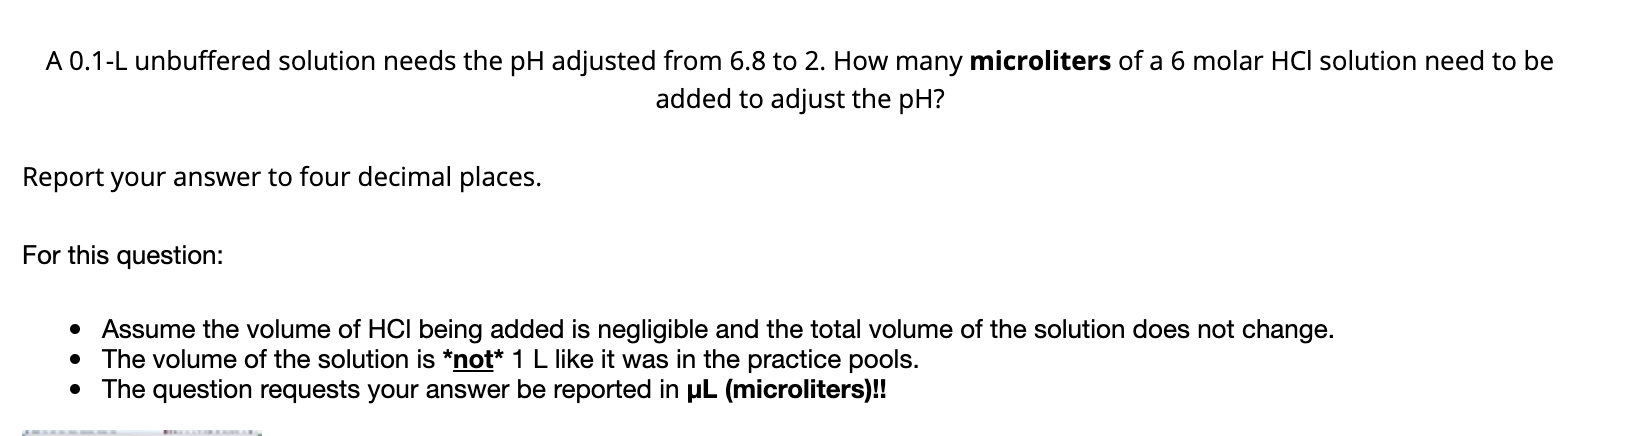 A 0.1-L unbuffered solution needs the pH adjusted from 6.8 to 2. How many microliters of a 6 molar HCI solution need to be
added to adjust the pH?
Report your answer to four decimal places.
For this question:
• Assume the volume of HCI being added is negligible and the total volume of the solution does not change.
• The volume of the solution is *not* 1 L like it was in the practice pools.
• The question requests your answer be reported in uL (microliters)!
